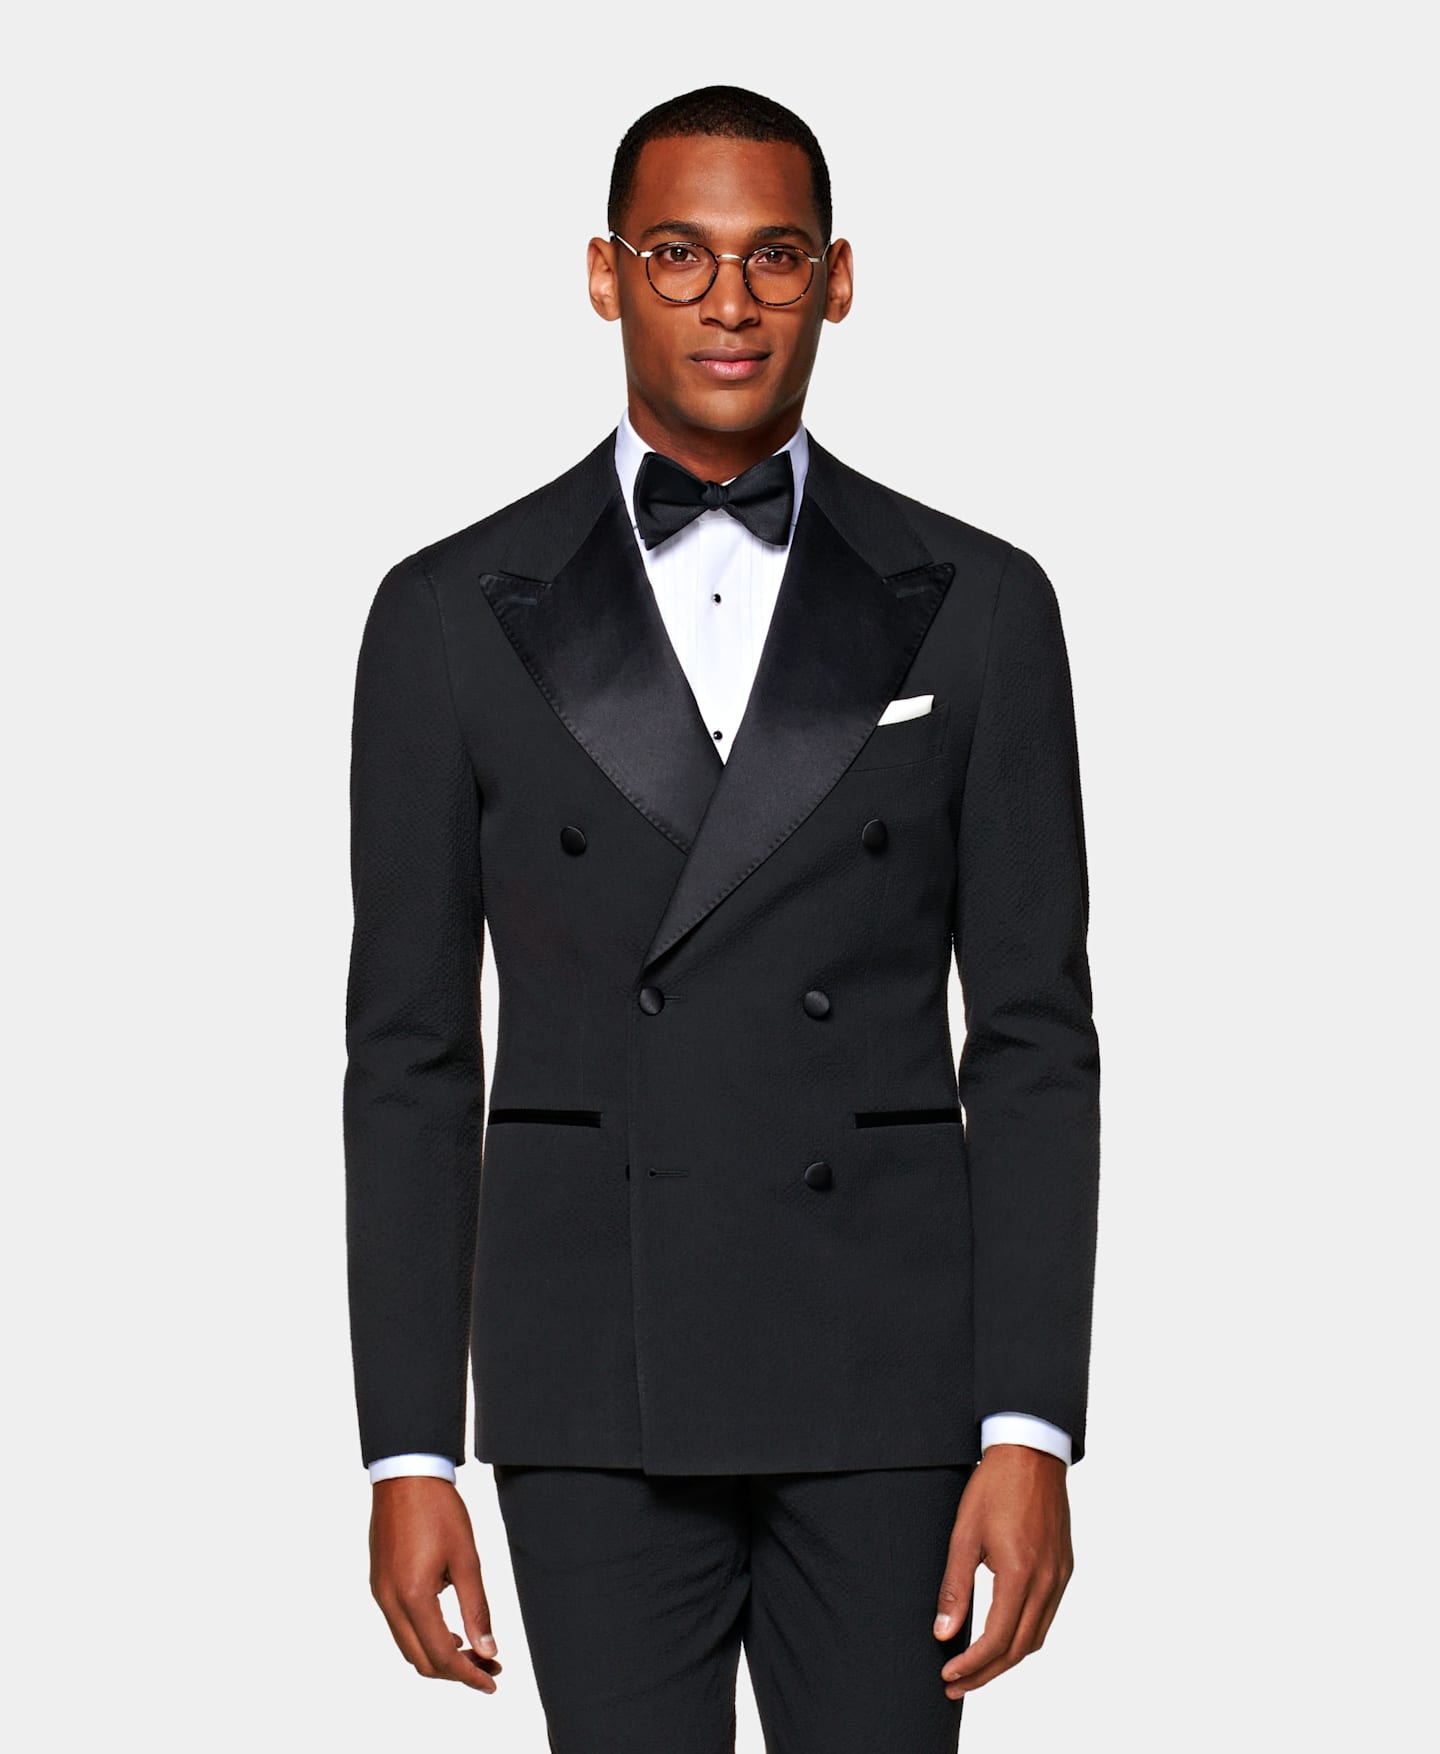 Black-tie Guide | Timeless classics to modern standouts | Suitsupply ...